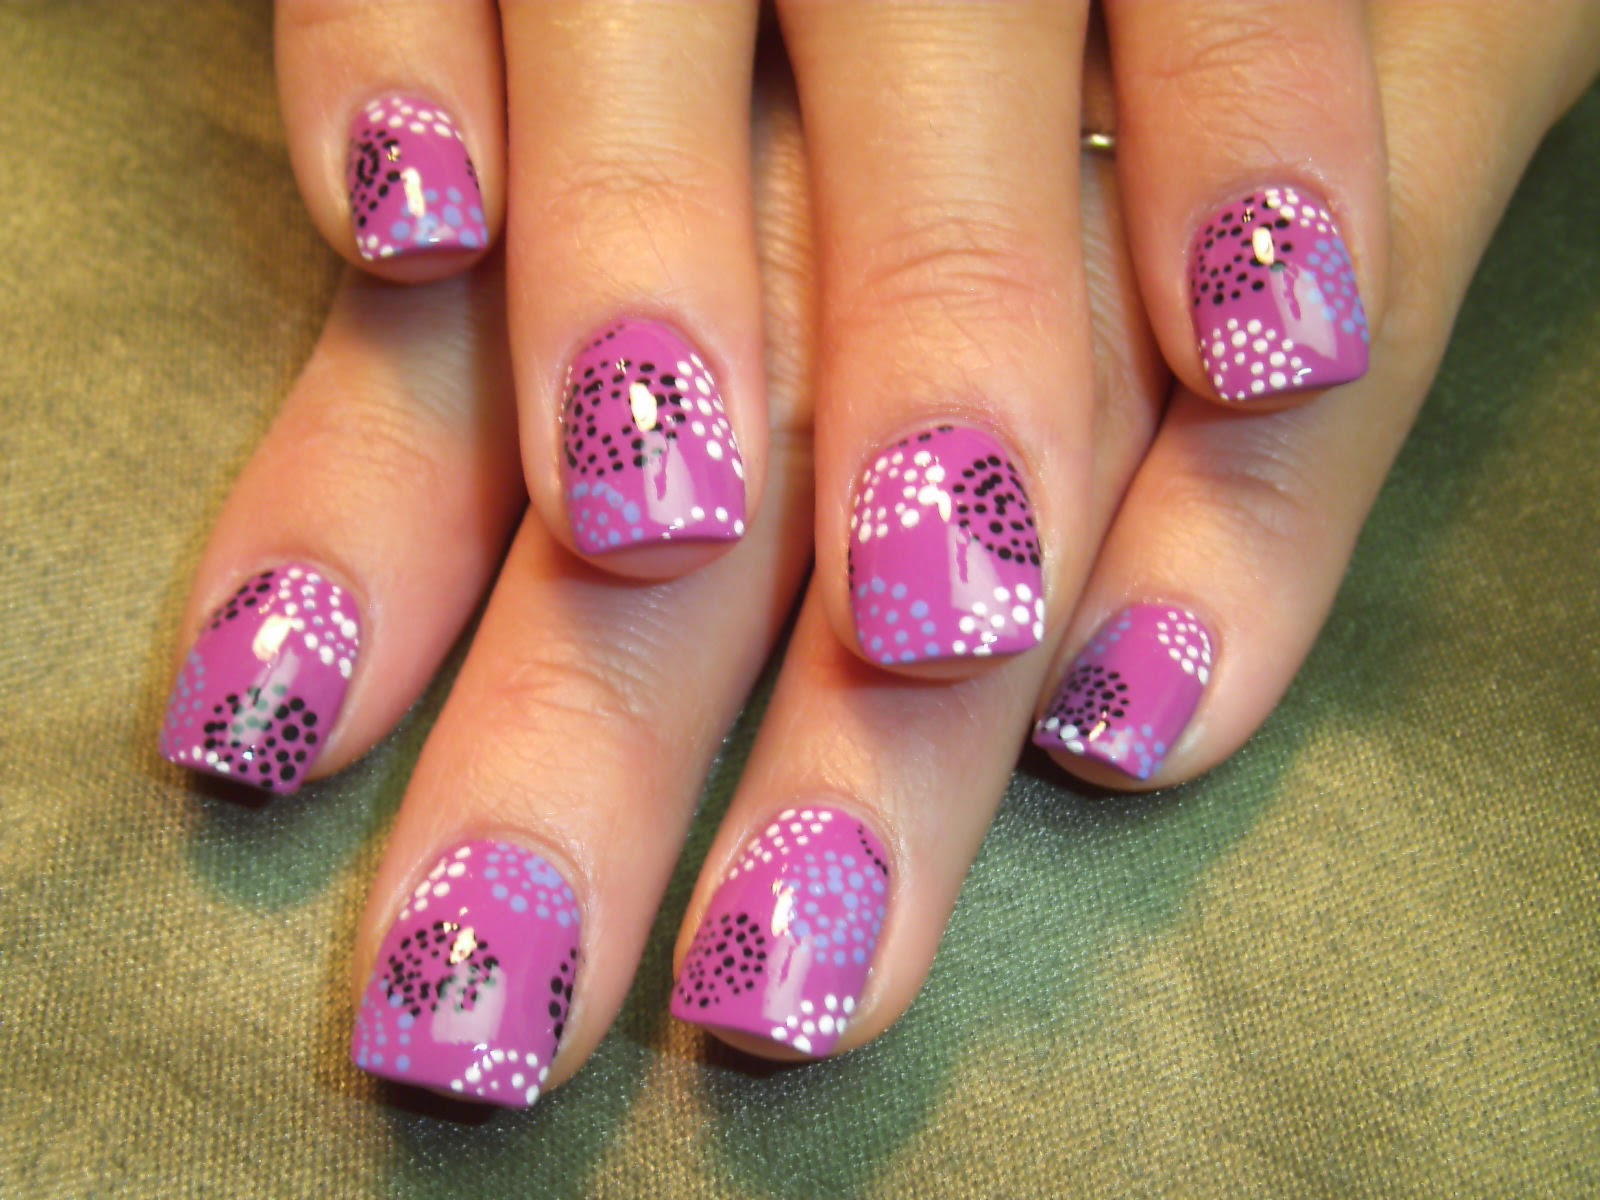 7. 20 Beautiful Nail Art Designs with Daisies and Studs - wide 6